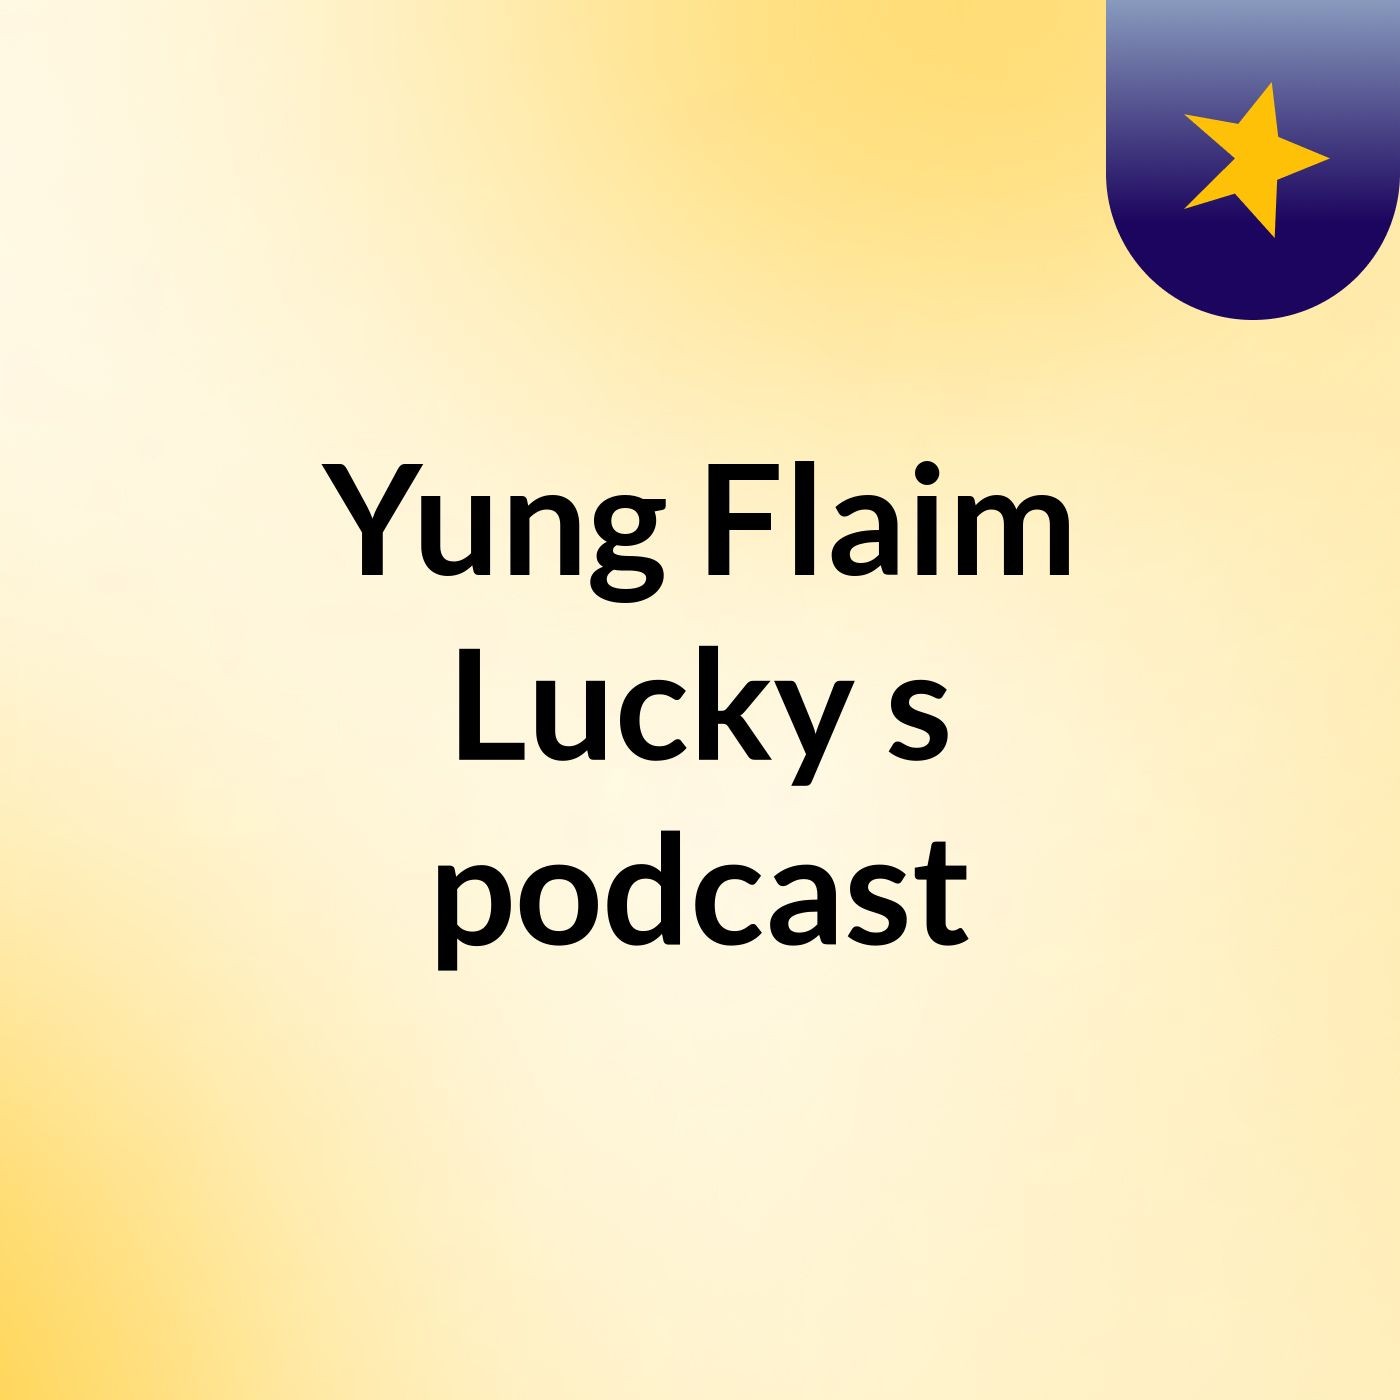 Yung Flaim Lucky's podcast